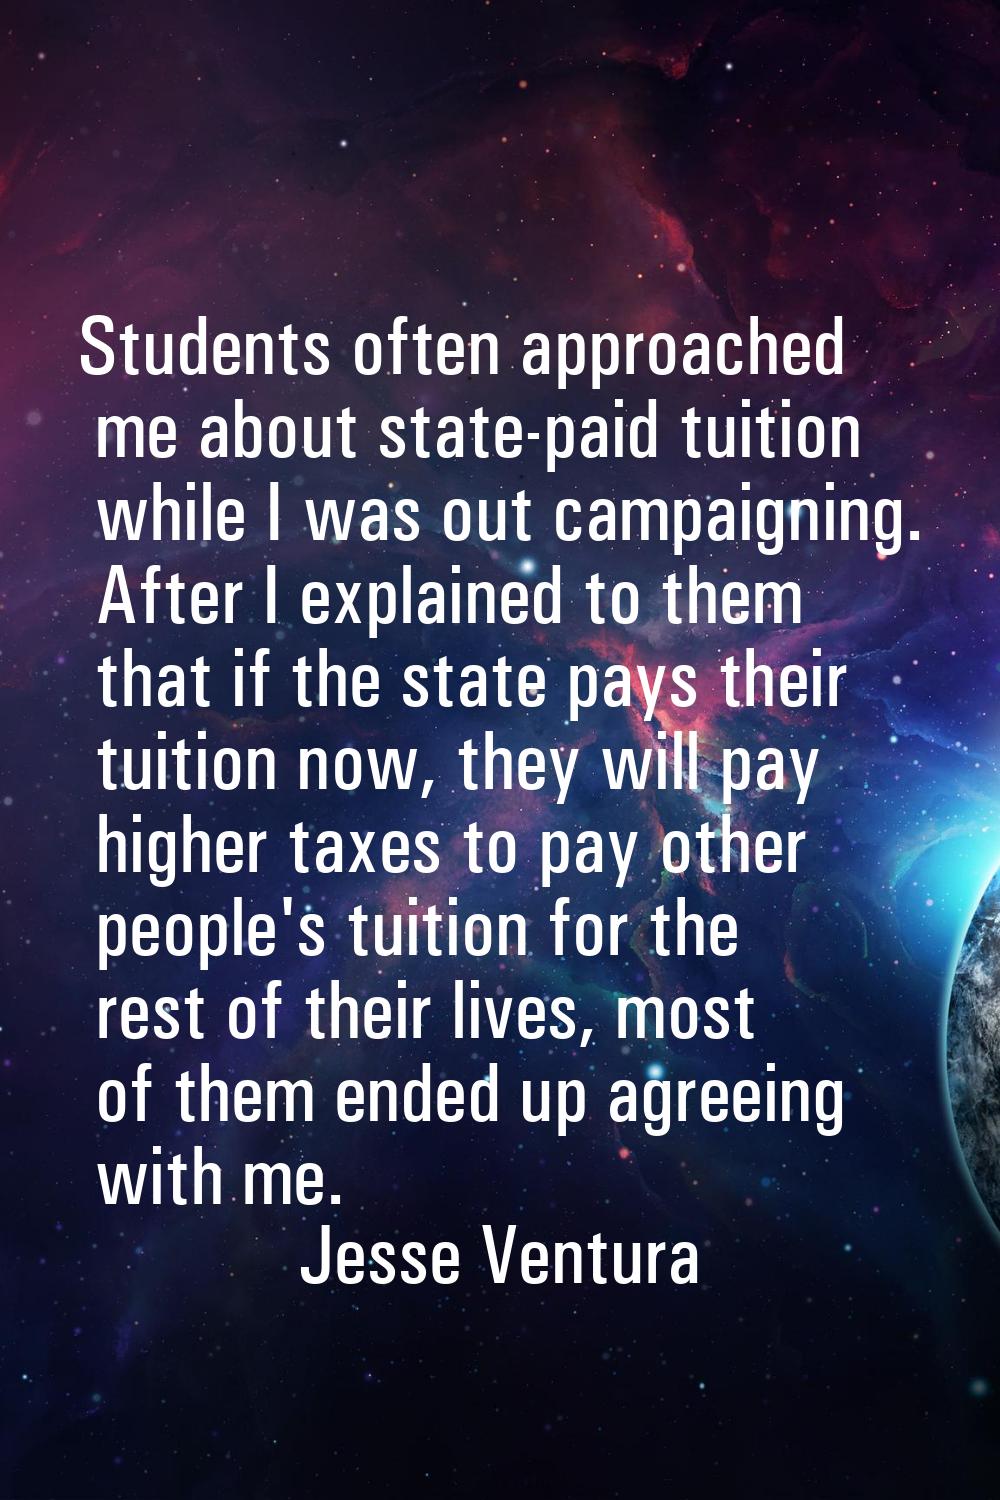 Students often approached me about state-paid tuition while I was out campaigning. After I explaine